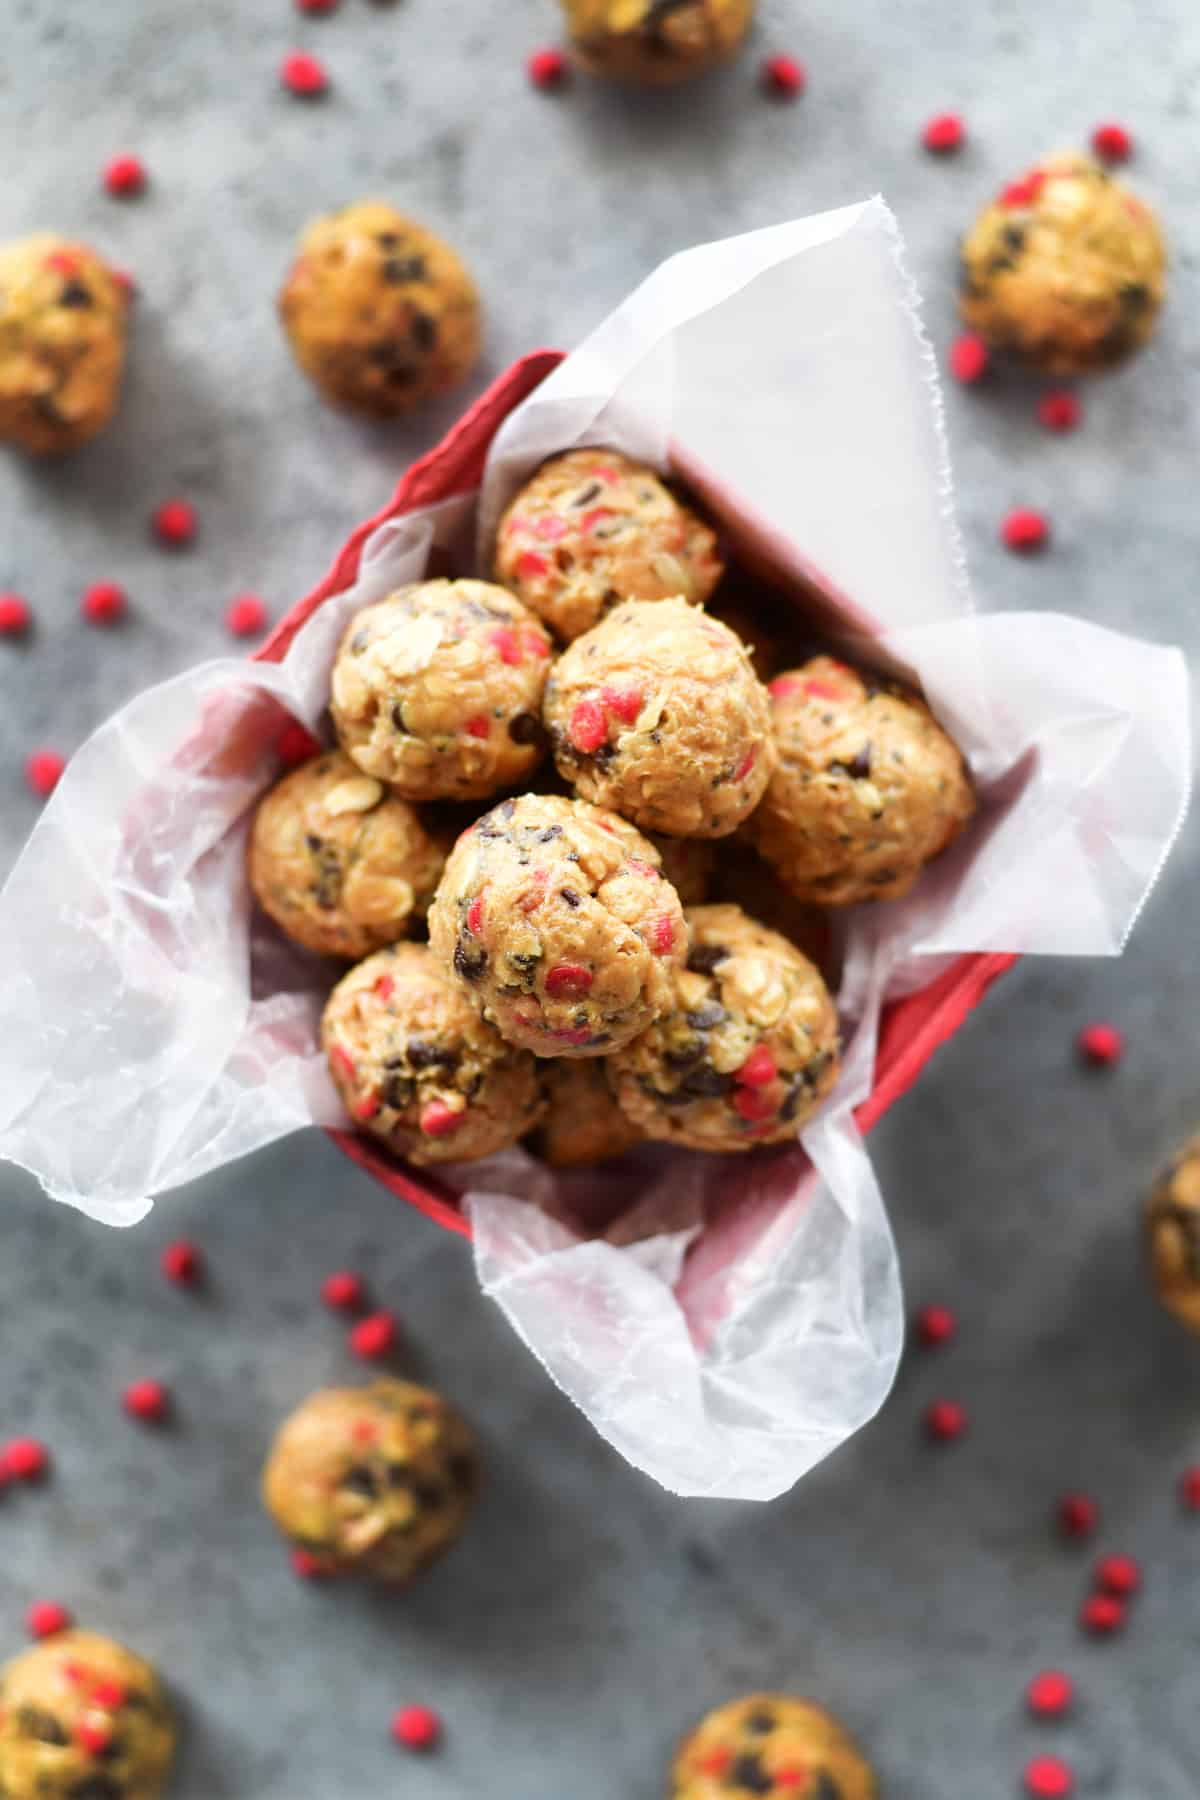 chocolate cherry energy balls in red berry basket